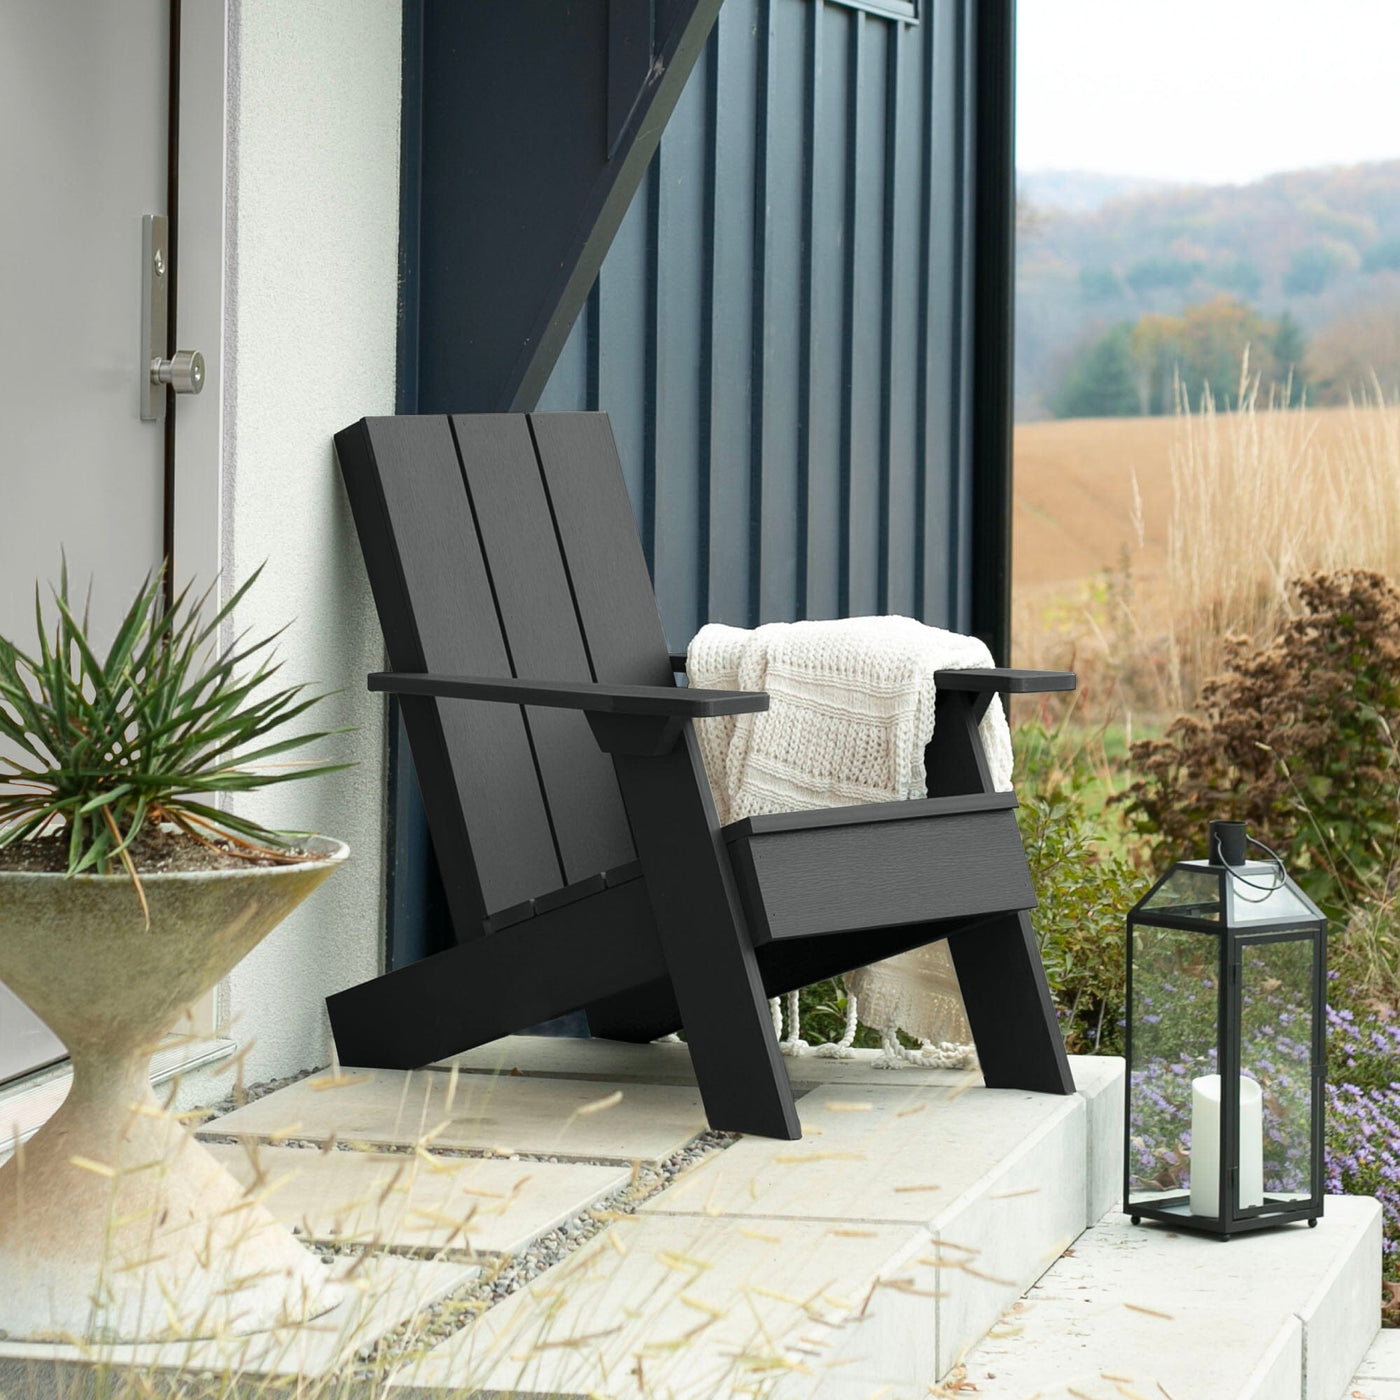 Black Italica Modern Adirondack chair on porch with blanket and lantern